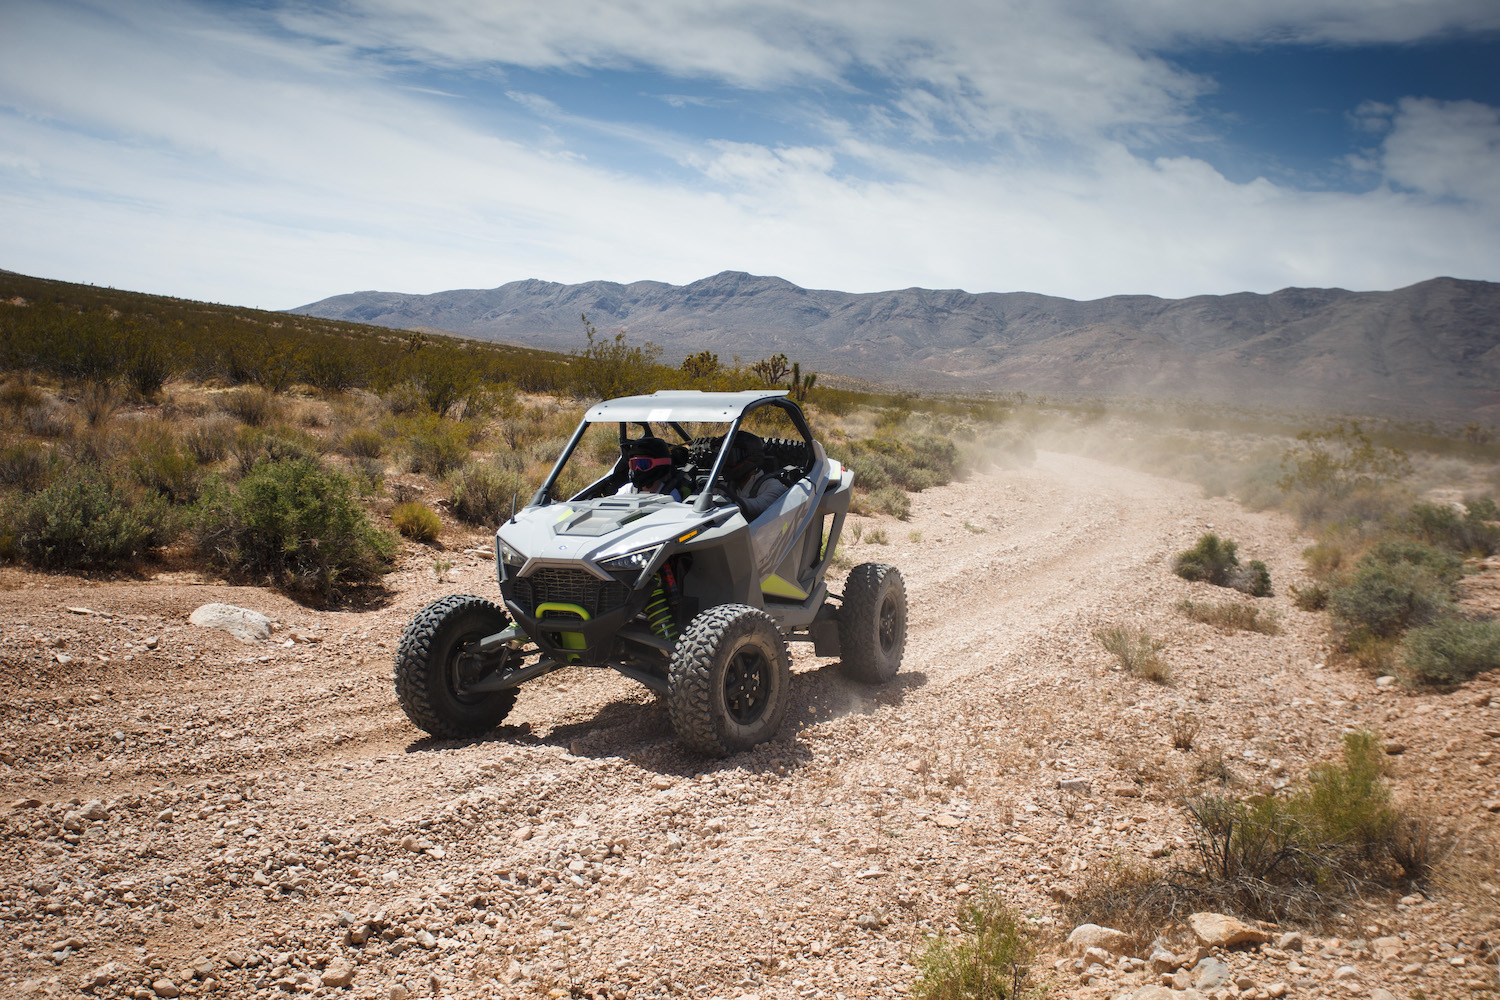 Polaris RZR Turbo R front end angle from driver's side on a dirt trail in the desert with bushes in the background.